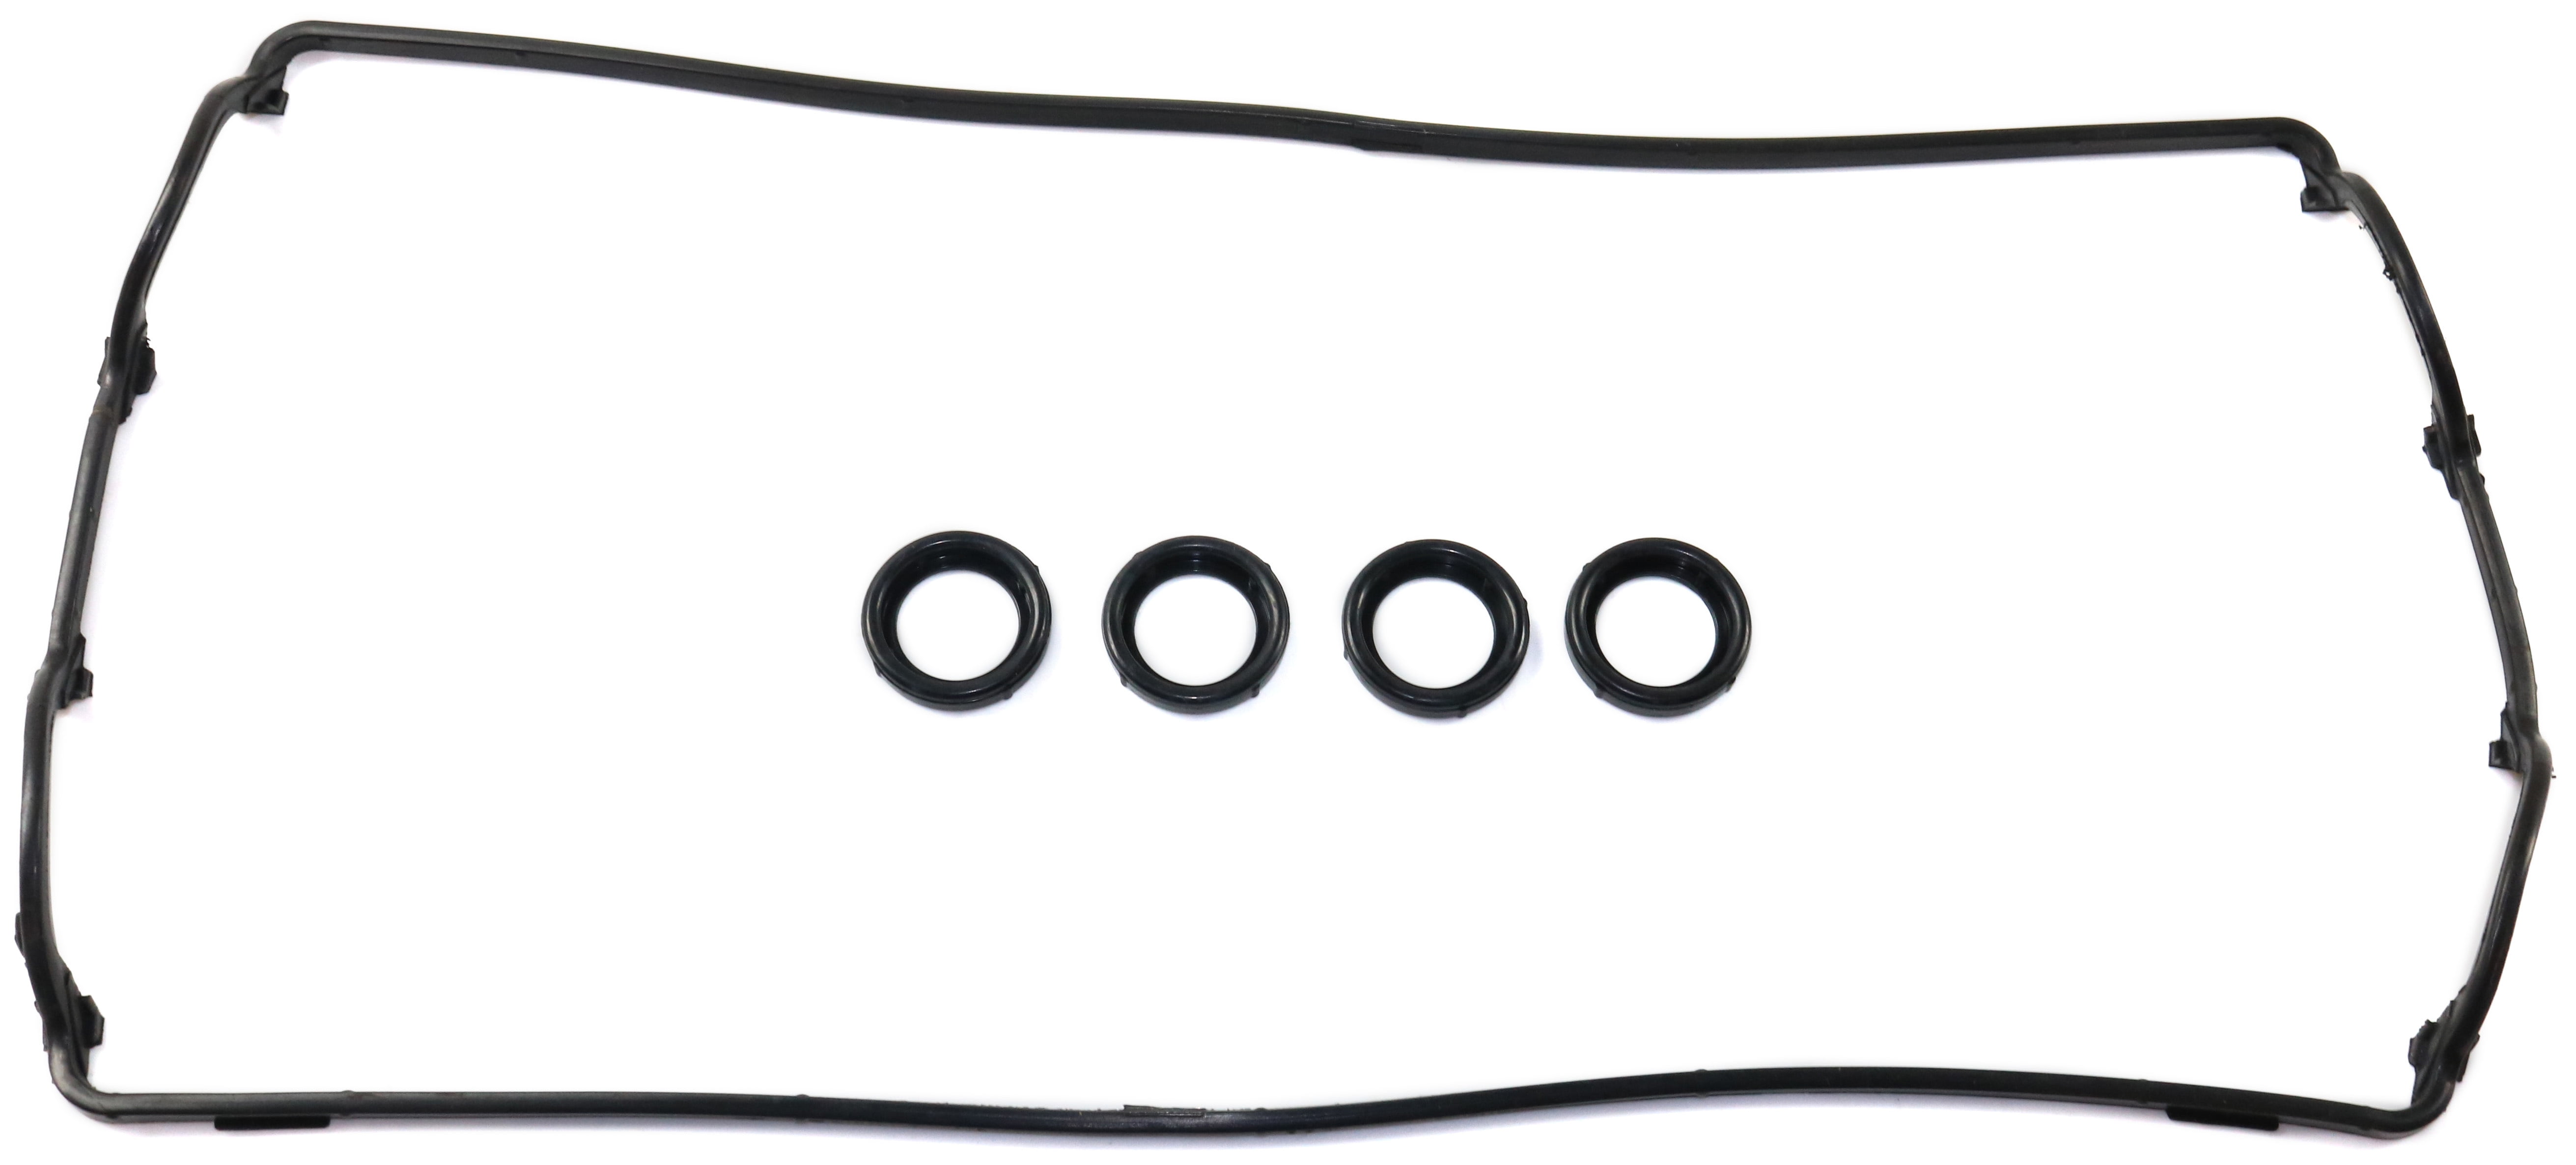 Valve Cover Gasket Compatible with 1997-2001 Honda CR-V 1990-2001 Acura  Integra 4Cyl 2.0L 1.8L